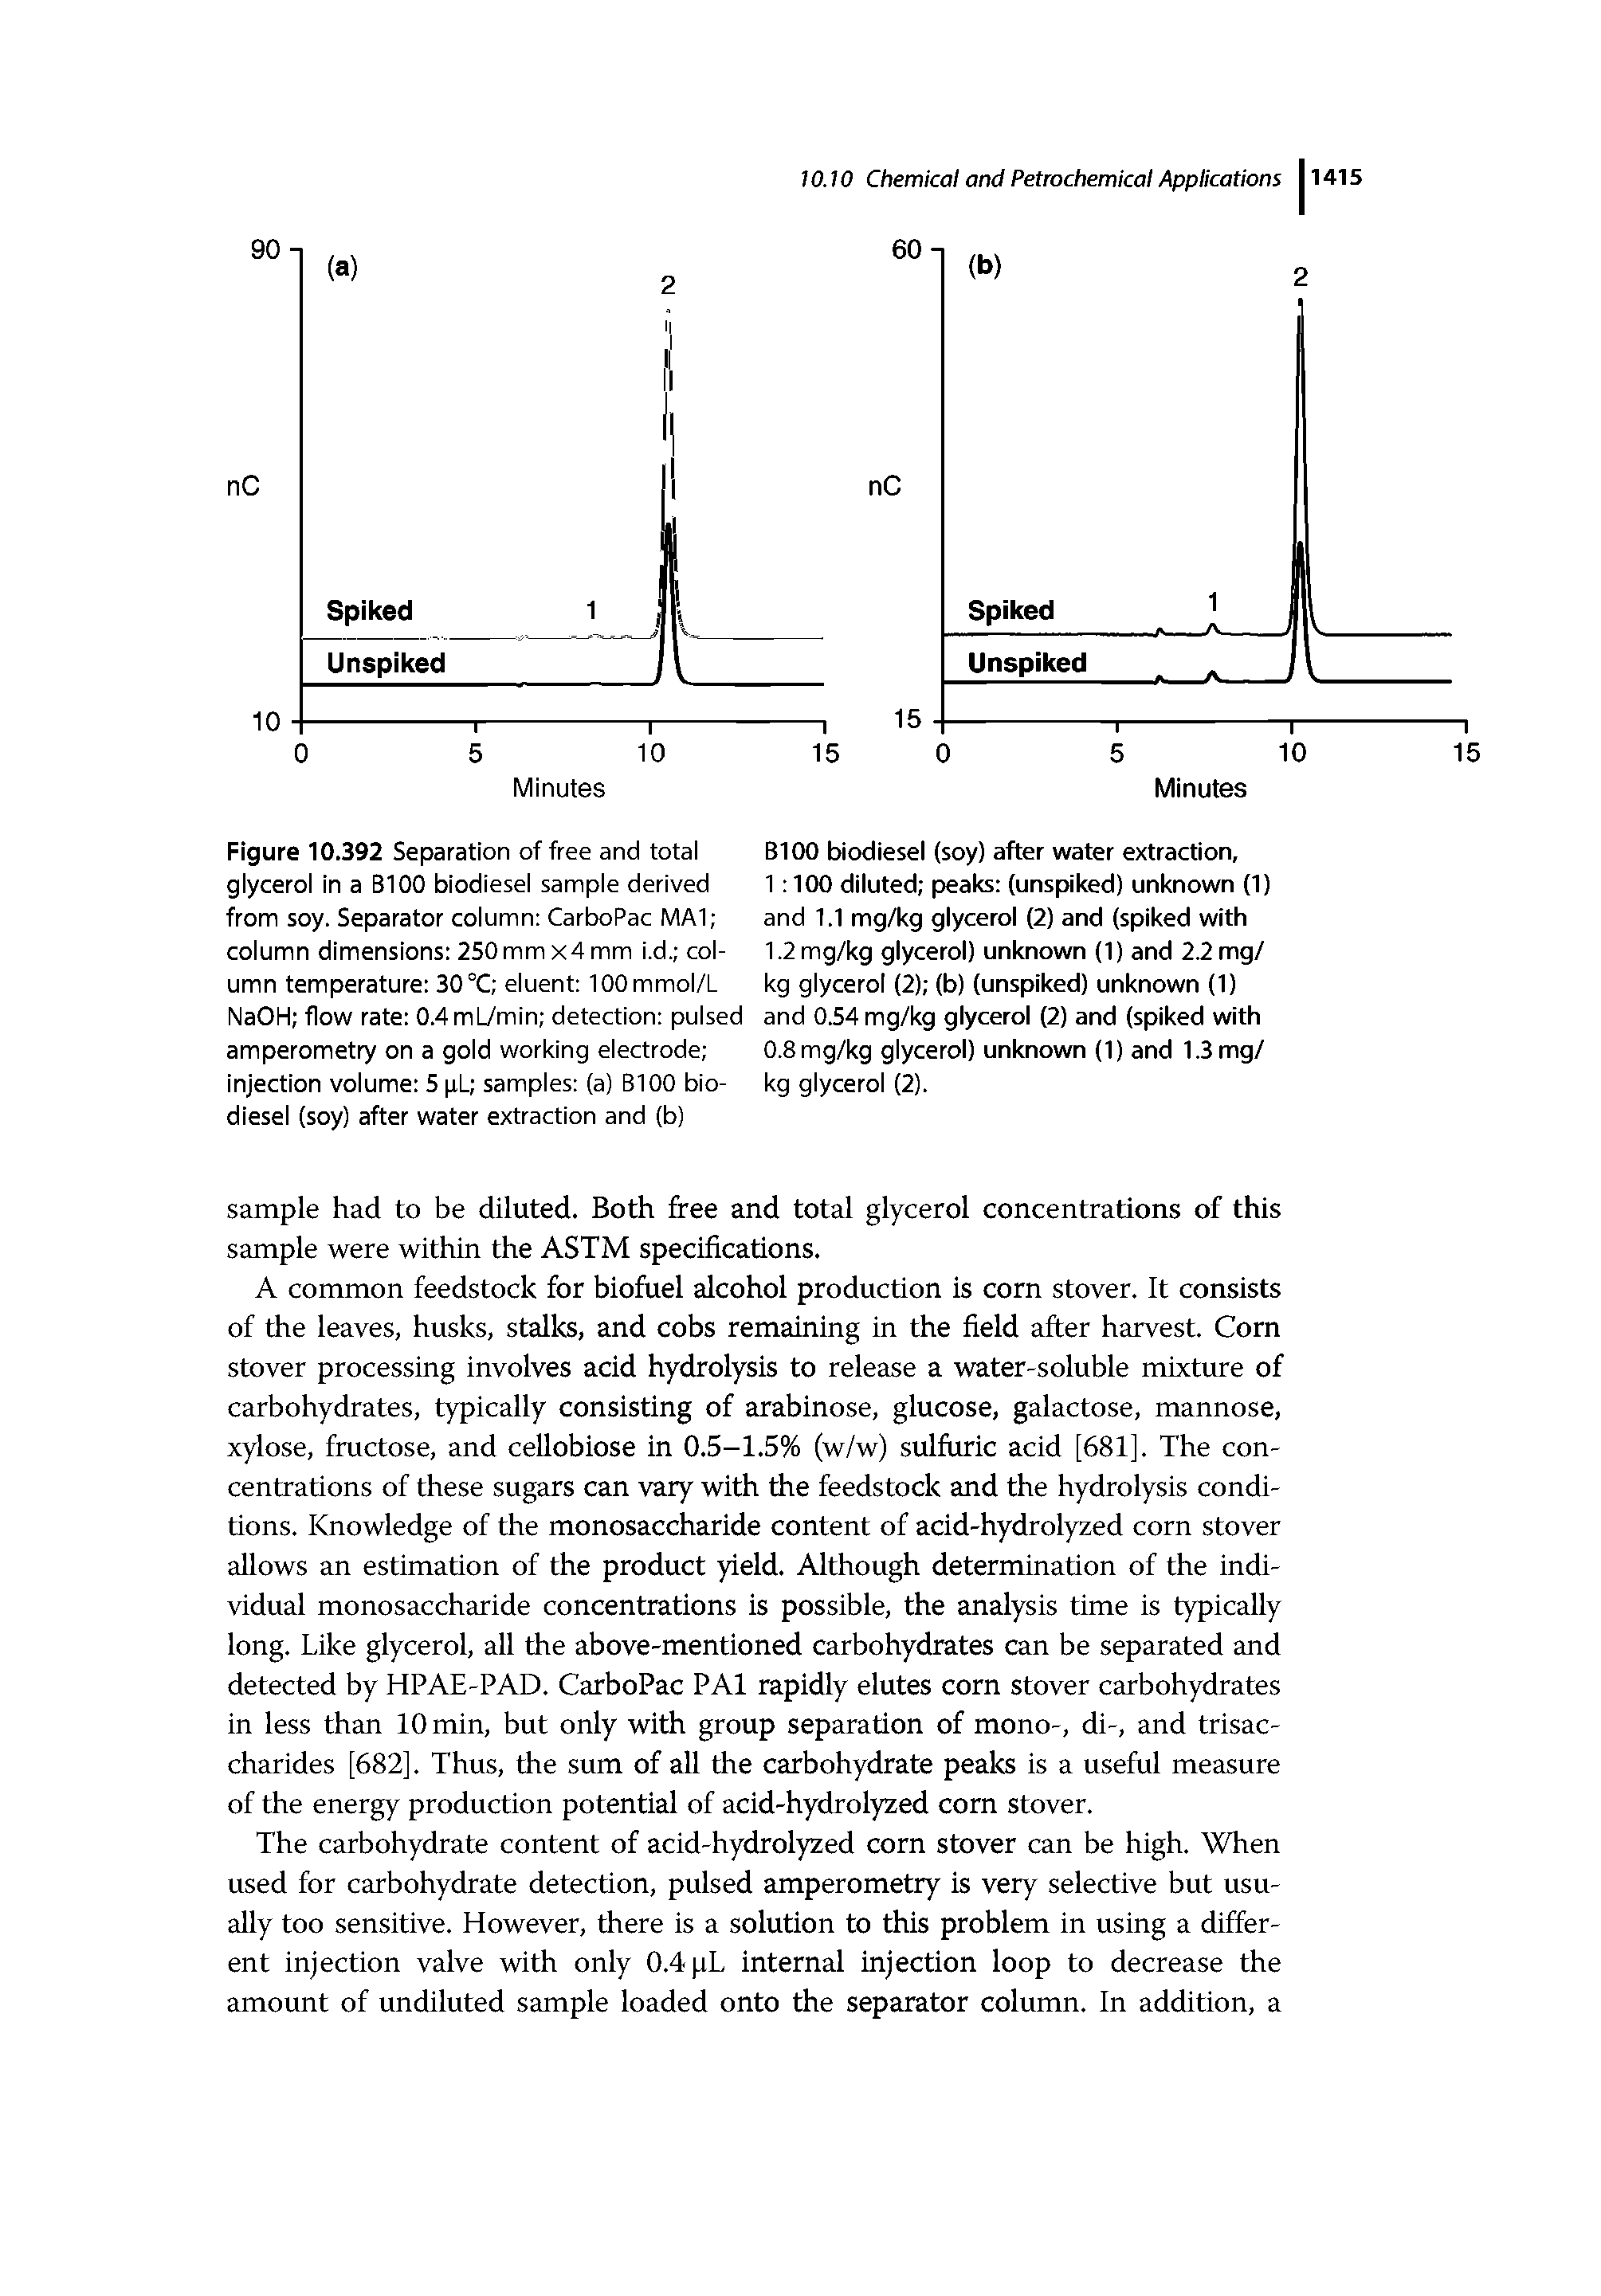 Figure 10.392 Separation of free and total glycerol in a B100 biodiesel sample derived from soy. Separator column CarboPac MAI column dimensions 250mm x4 mm i.d. column temperature 30°C eluent lOOmmol/L NaOH flow rate 0.4mLymin detection pulsed amperometry on a gold working electrode injection volume 5 pL samples (a) B100 biodiesel (soy) after water extraction and (b)...